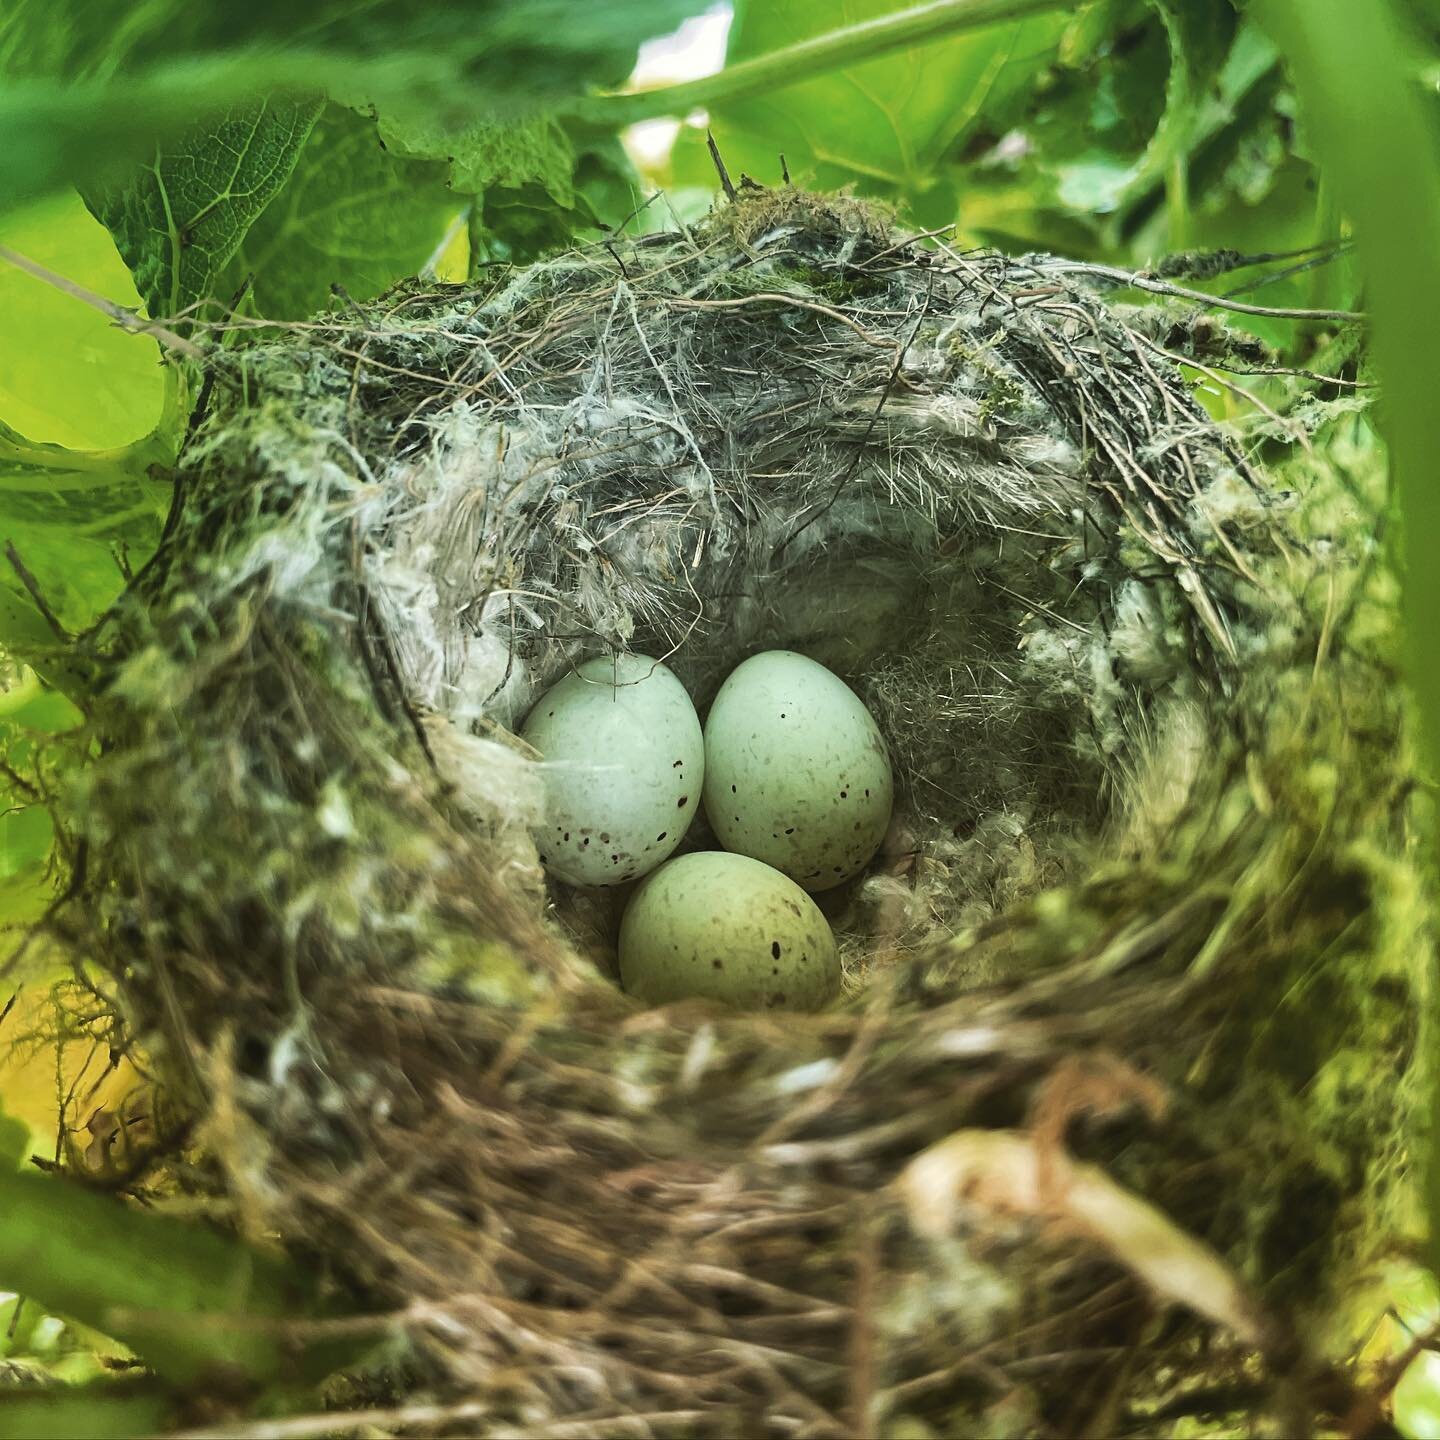 Hidden treasures in the vineyard. Nice to know we can leave these little guys undisturbed - it&rsquo;s one of the advantages of picking and pruning all our vines by hand.

#viticulture #natureinthevineyard #handpickedgrapes #birdsnest #speckledeggs #